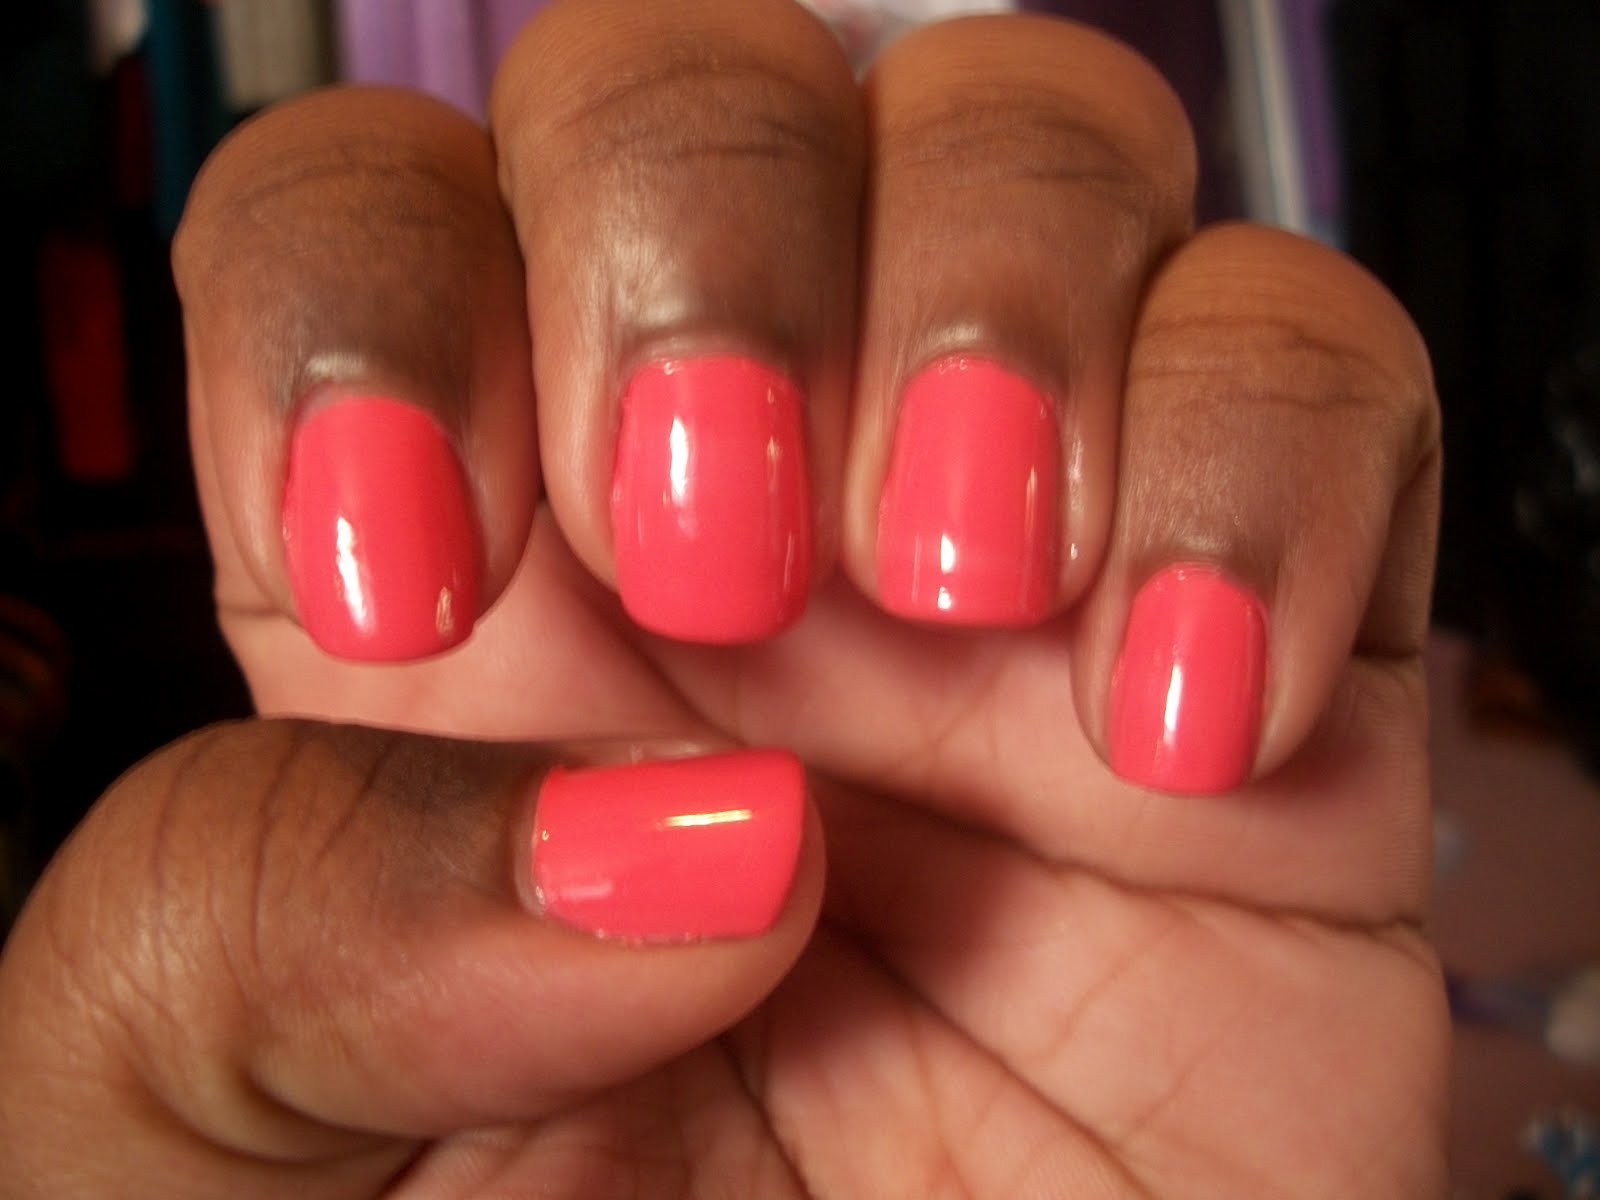 2. Essie Nail Polish in "Coral Reef" - wide 7